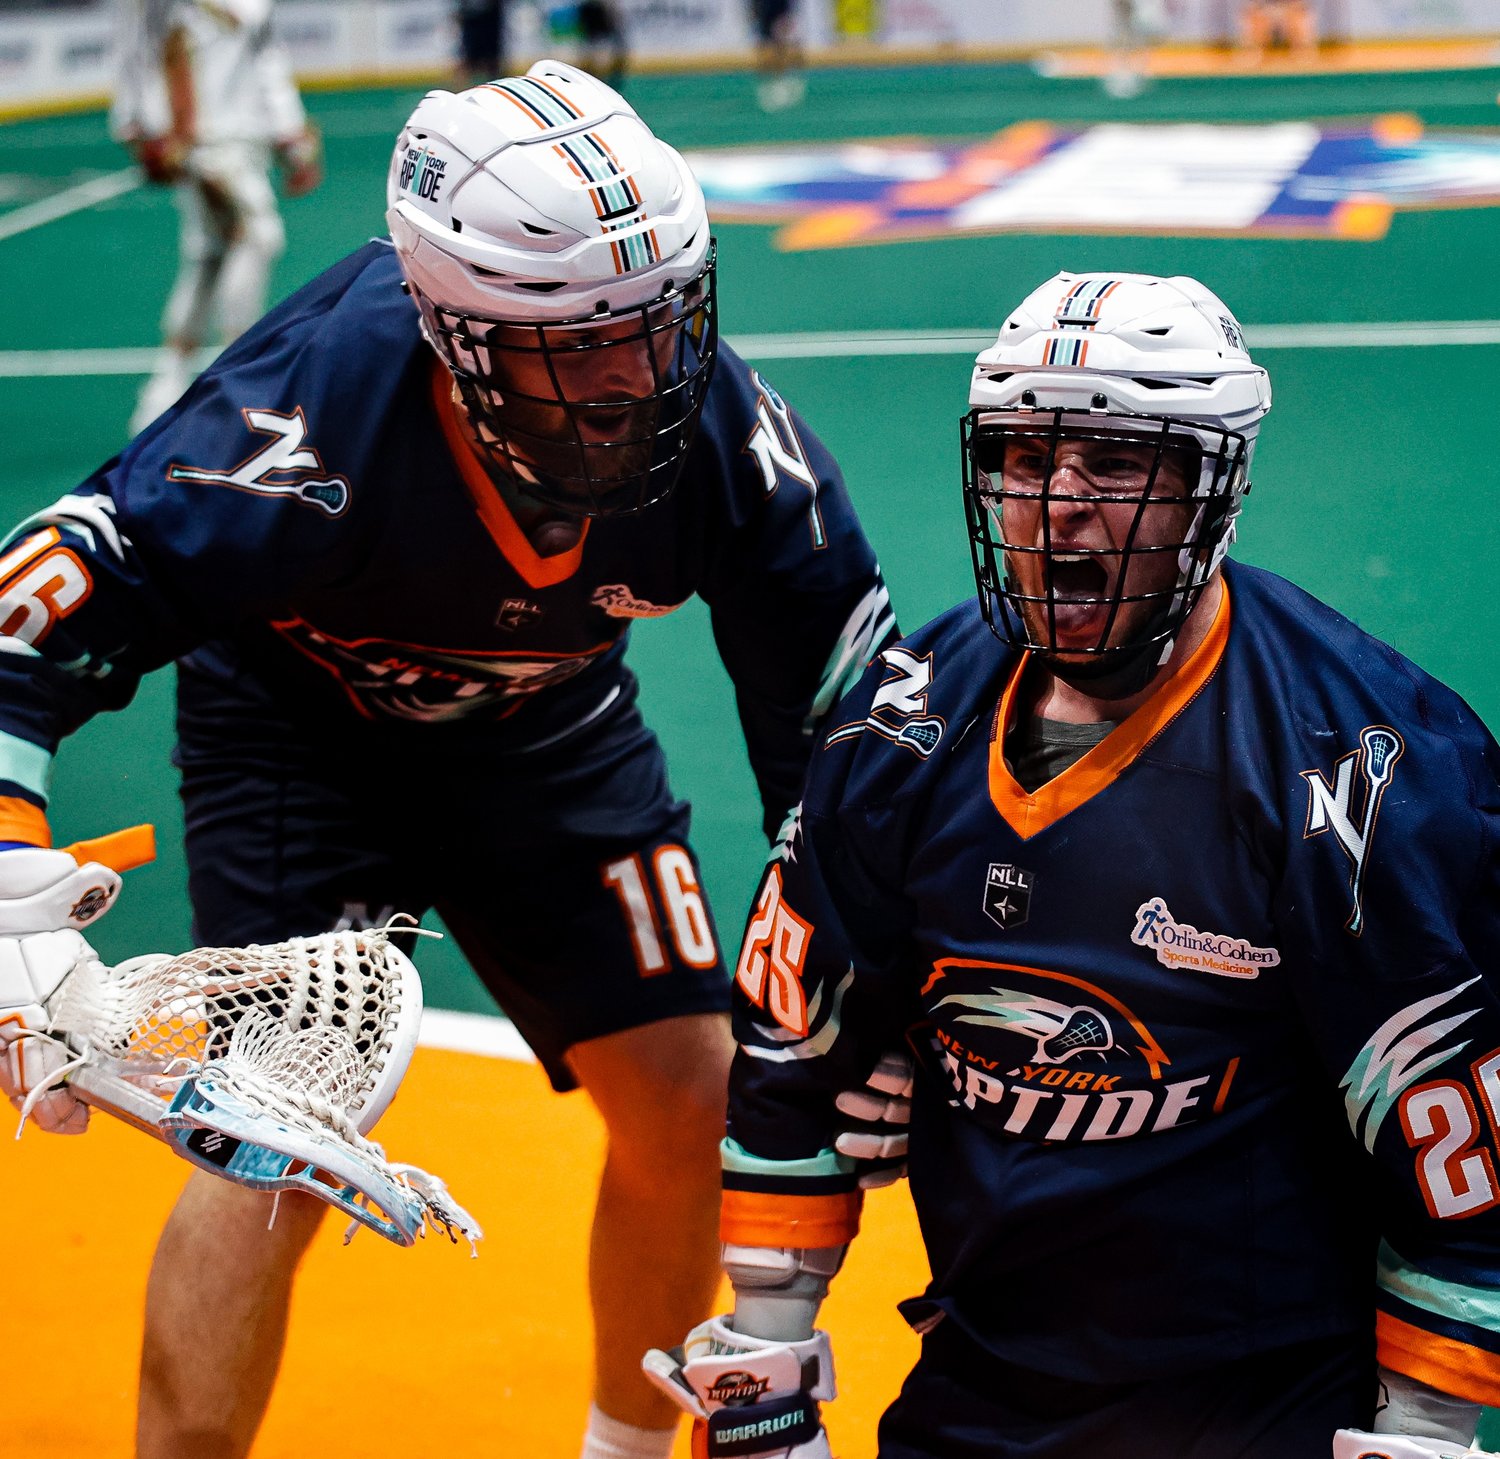 The Riptide's Scott Dominey, right, celebrated his fourth-quarter goal with Jack Kelly on Saturday as New York defeated Philadelphia, 13-10.